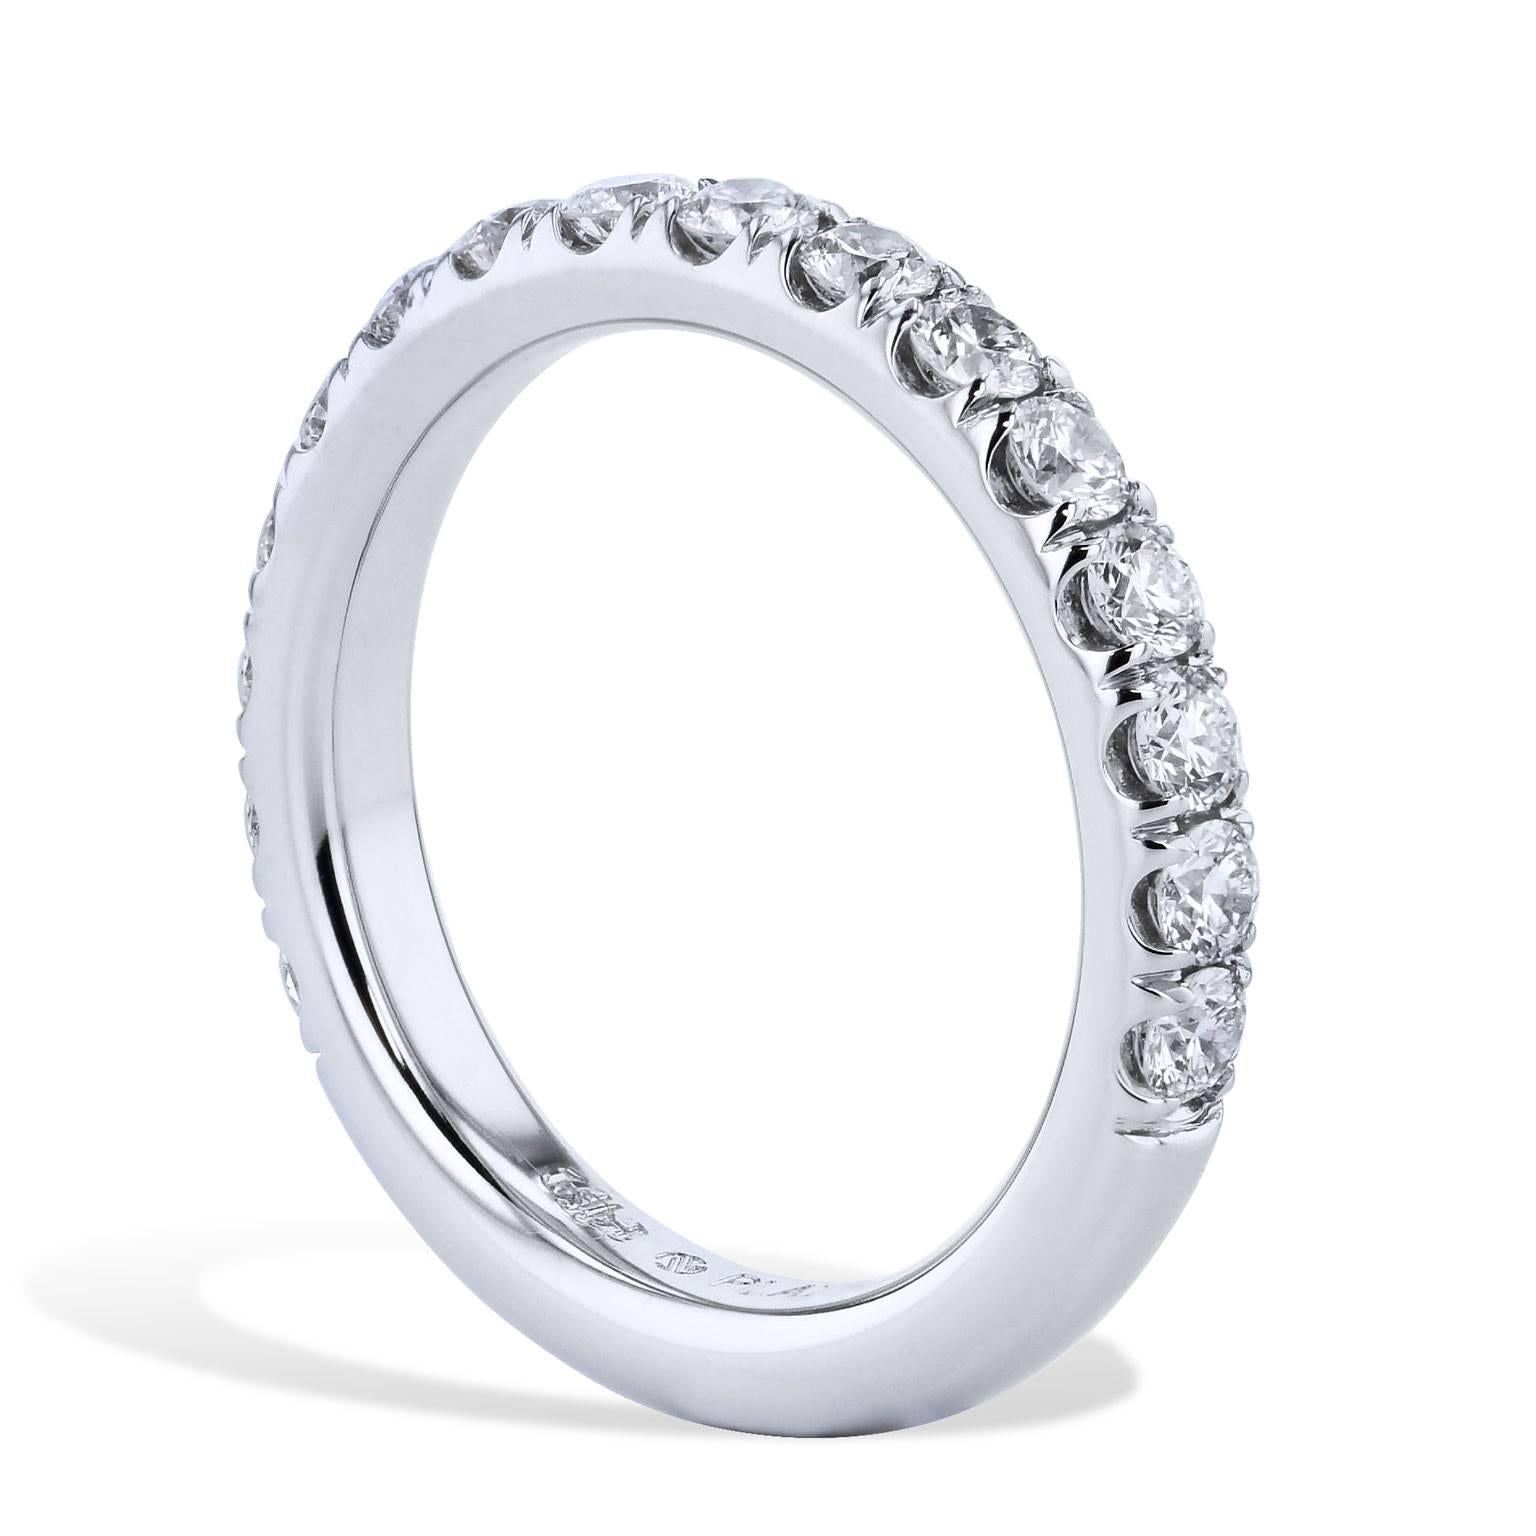 Imagine sixteen pave-set round brilliant cut diamonds in u-setting encircling your finger in this handmade platinum band ring. This charming half-diamond band features a total weight of 0.80 carat on a 3.00 millimeter thick band (H/VS) (Size 5.5).